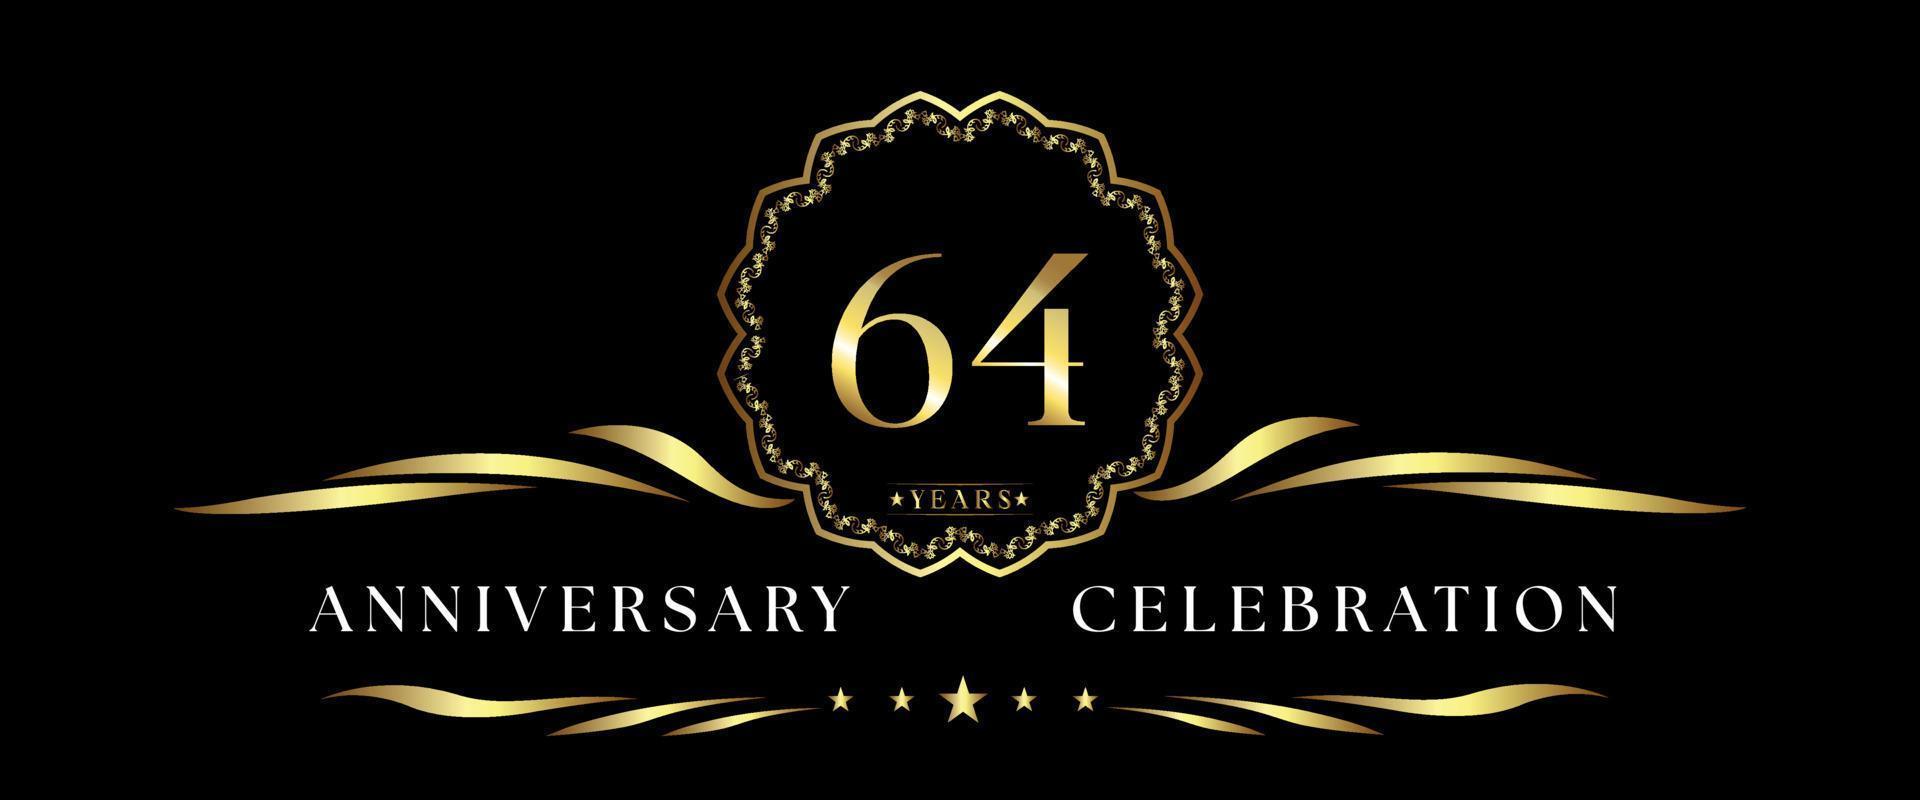 64 years anniversary celebration with gold decorative frame isolated on black background. Vector design for greeting card, birthday party, wedding, event party, ceremony. 64 years Anniversary logo.